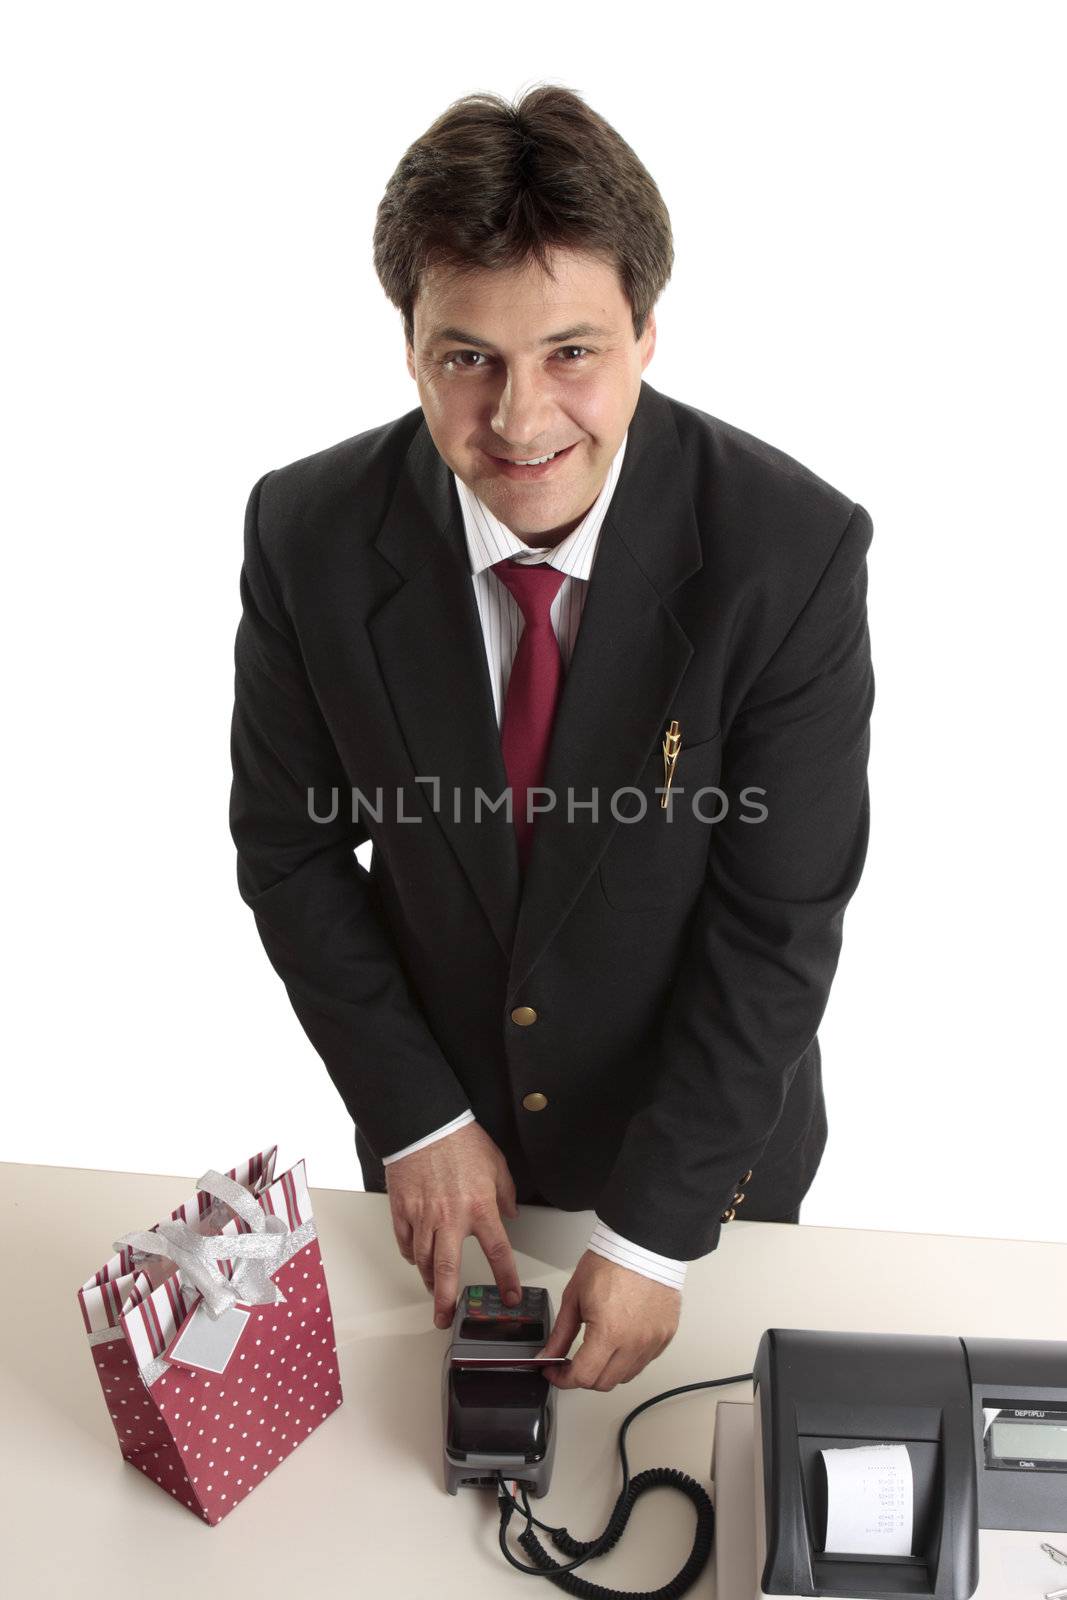 A man dressed in suit buying a birthday, Christmas or special occasion present using credit or debit card.